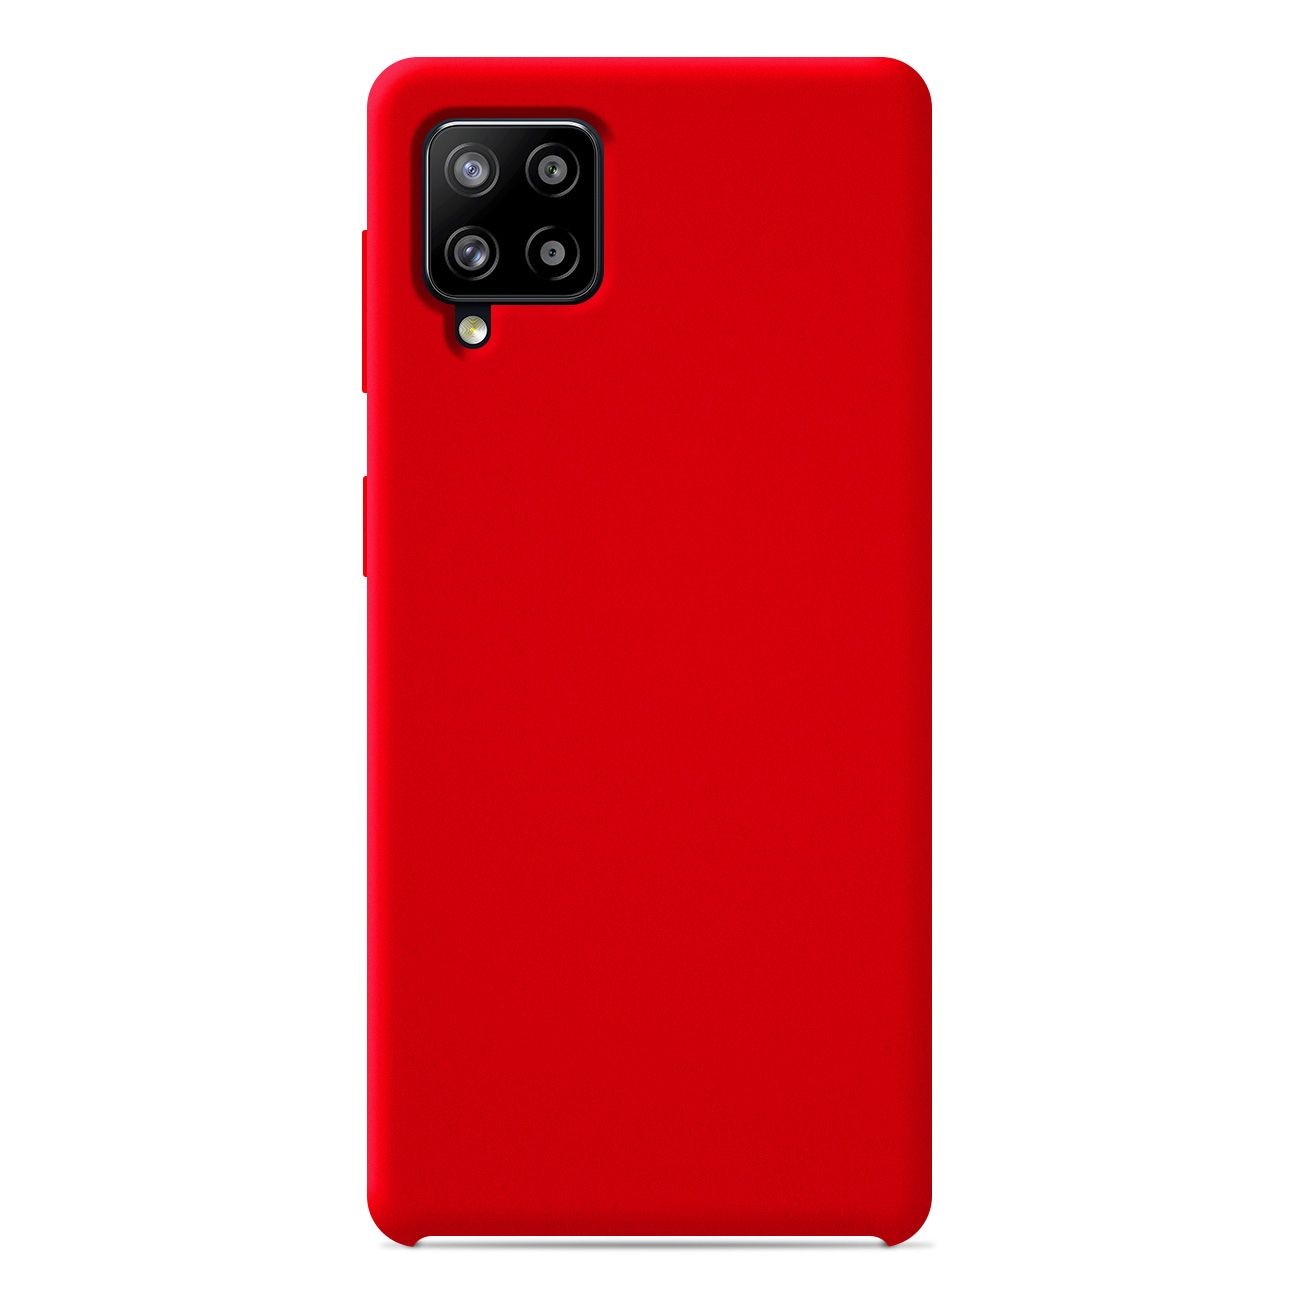 Coque silicone unie Soft Touch Rouge compatible Samsung Galaxy A42 5G